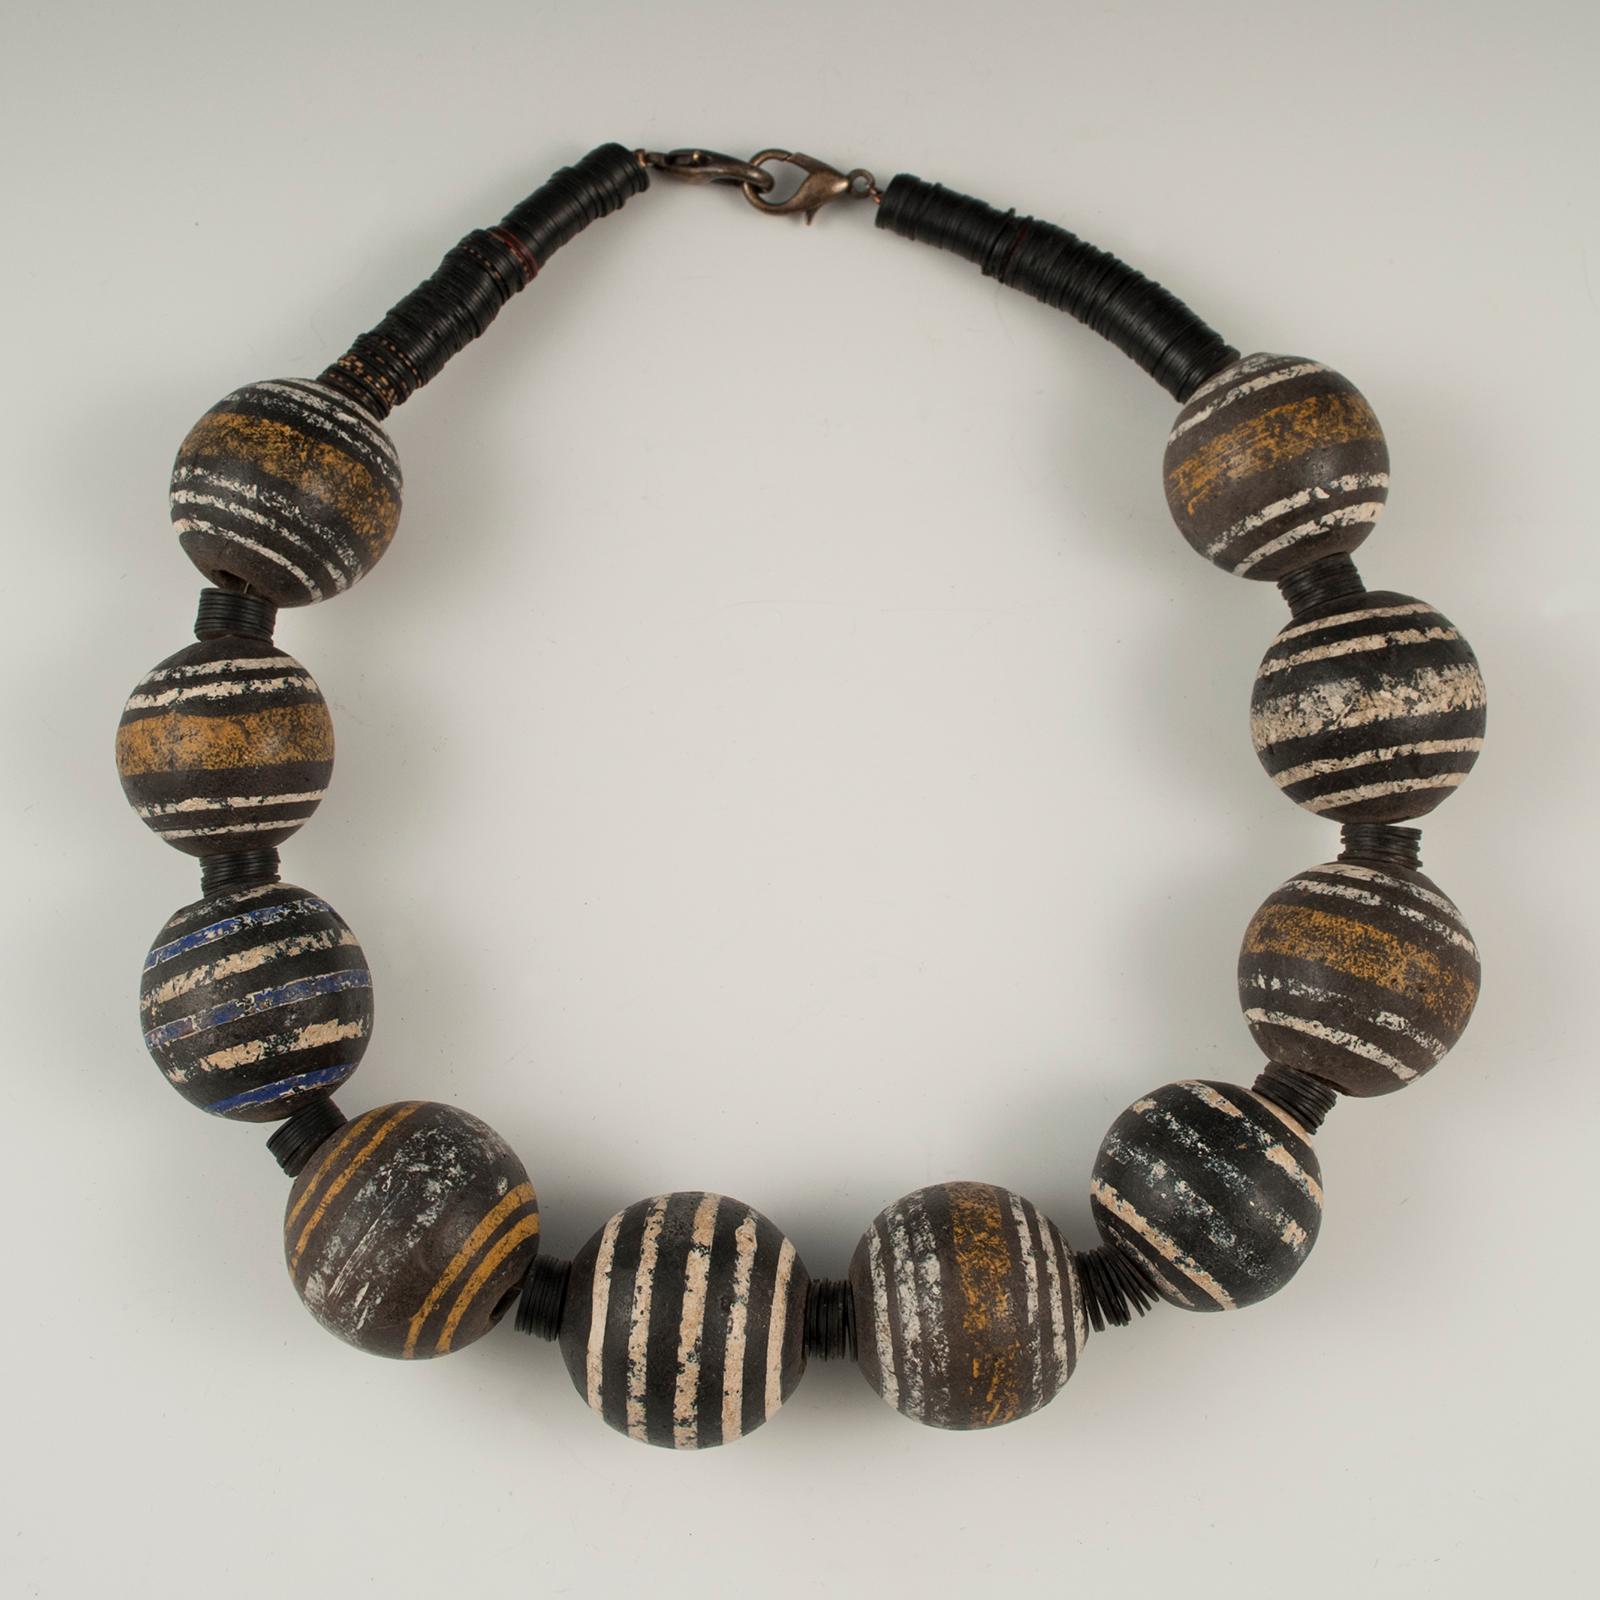 Offered by Zena Kruzick
Large Mali terracotta tribal bead necklace by Claire Ginioux, Paris, France.

Mali terracotta beads from the 19th century and small black disks are combined in a strikingly graphic bead necklace.
The inner circumference